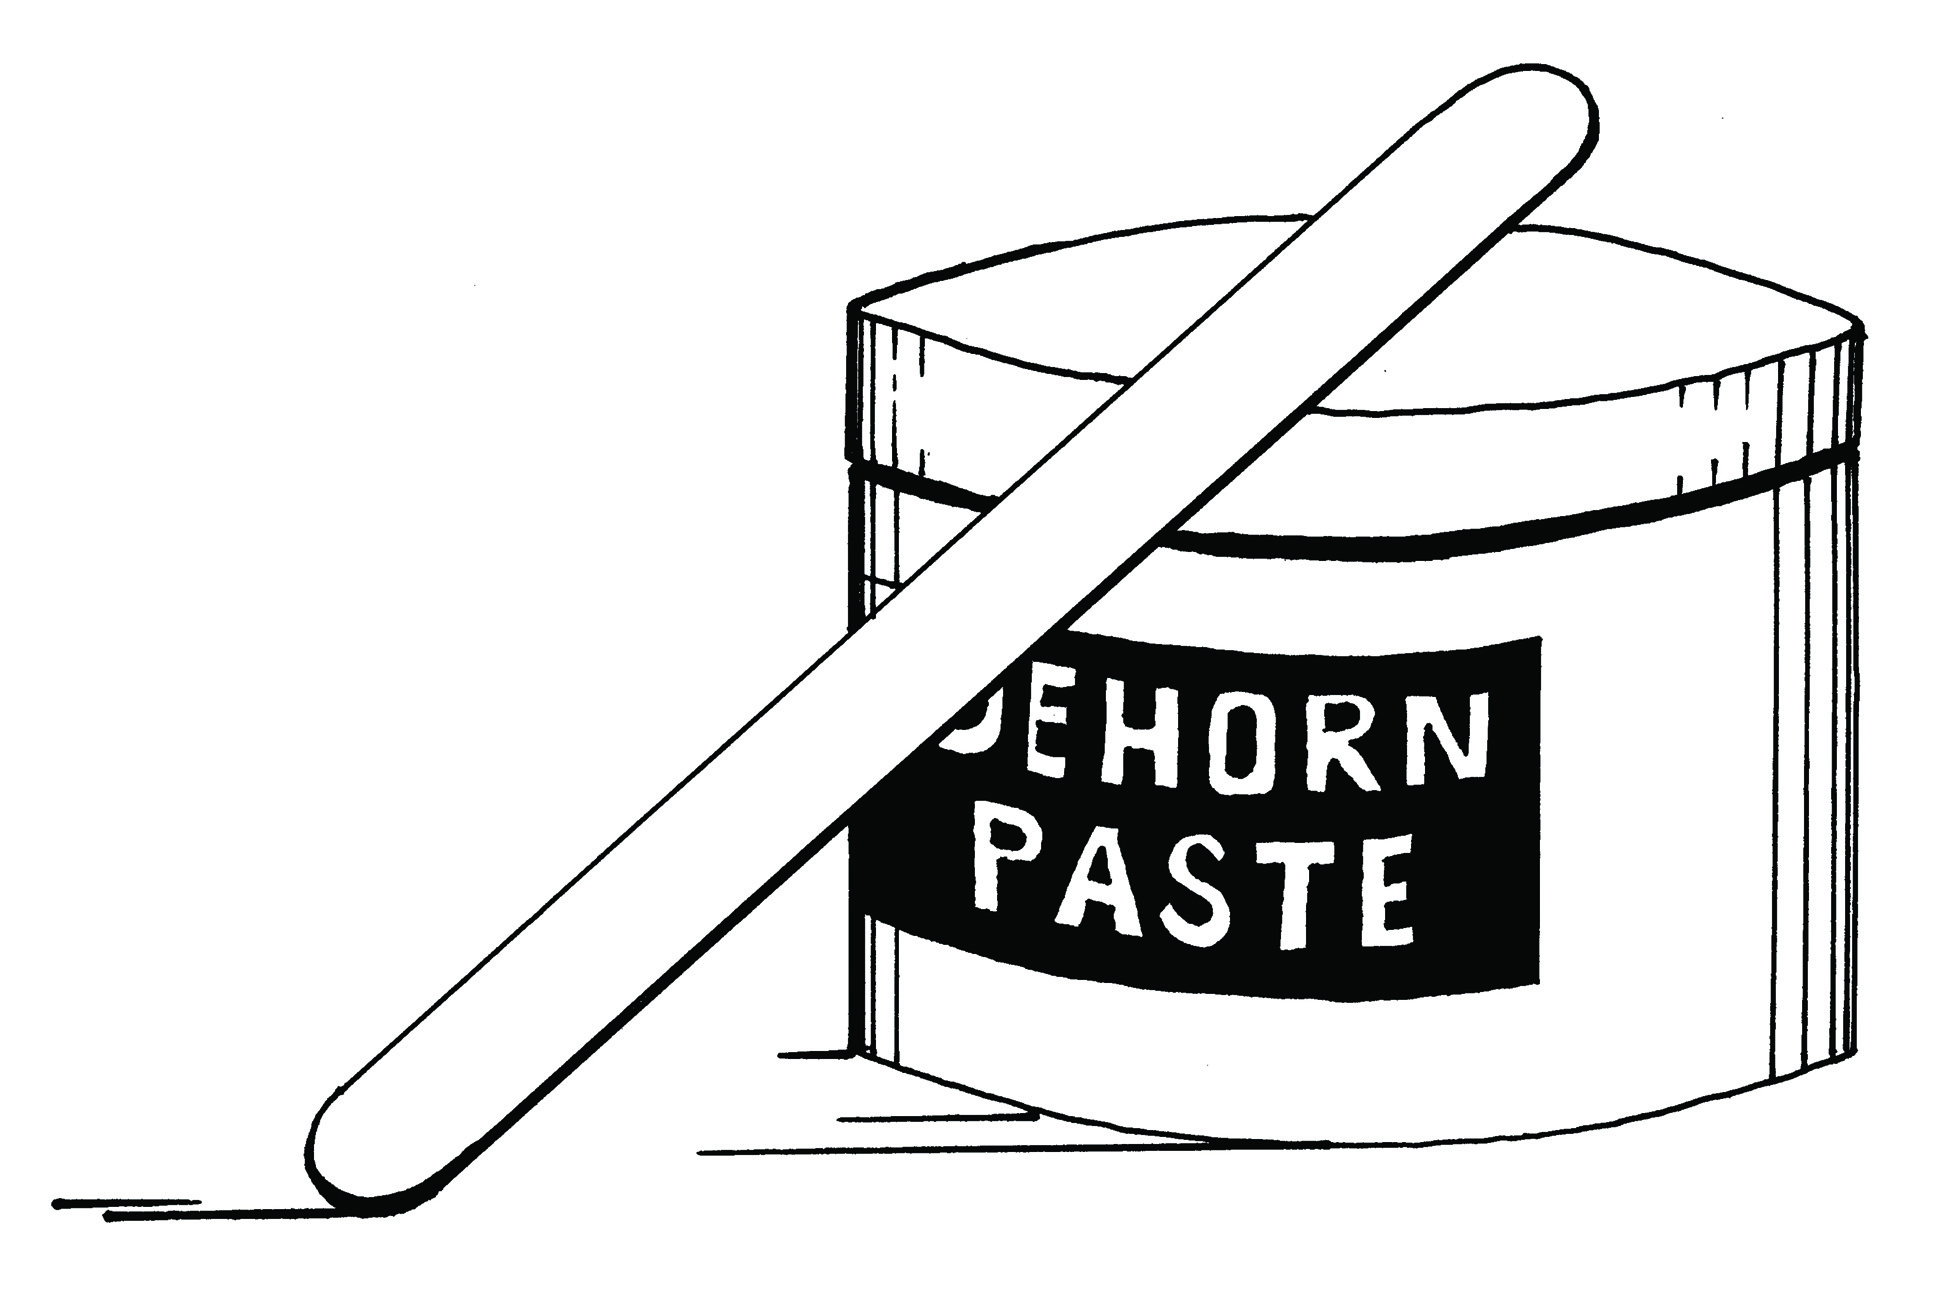 Can of dehorning paste with popsicle